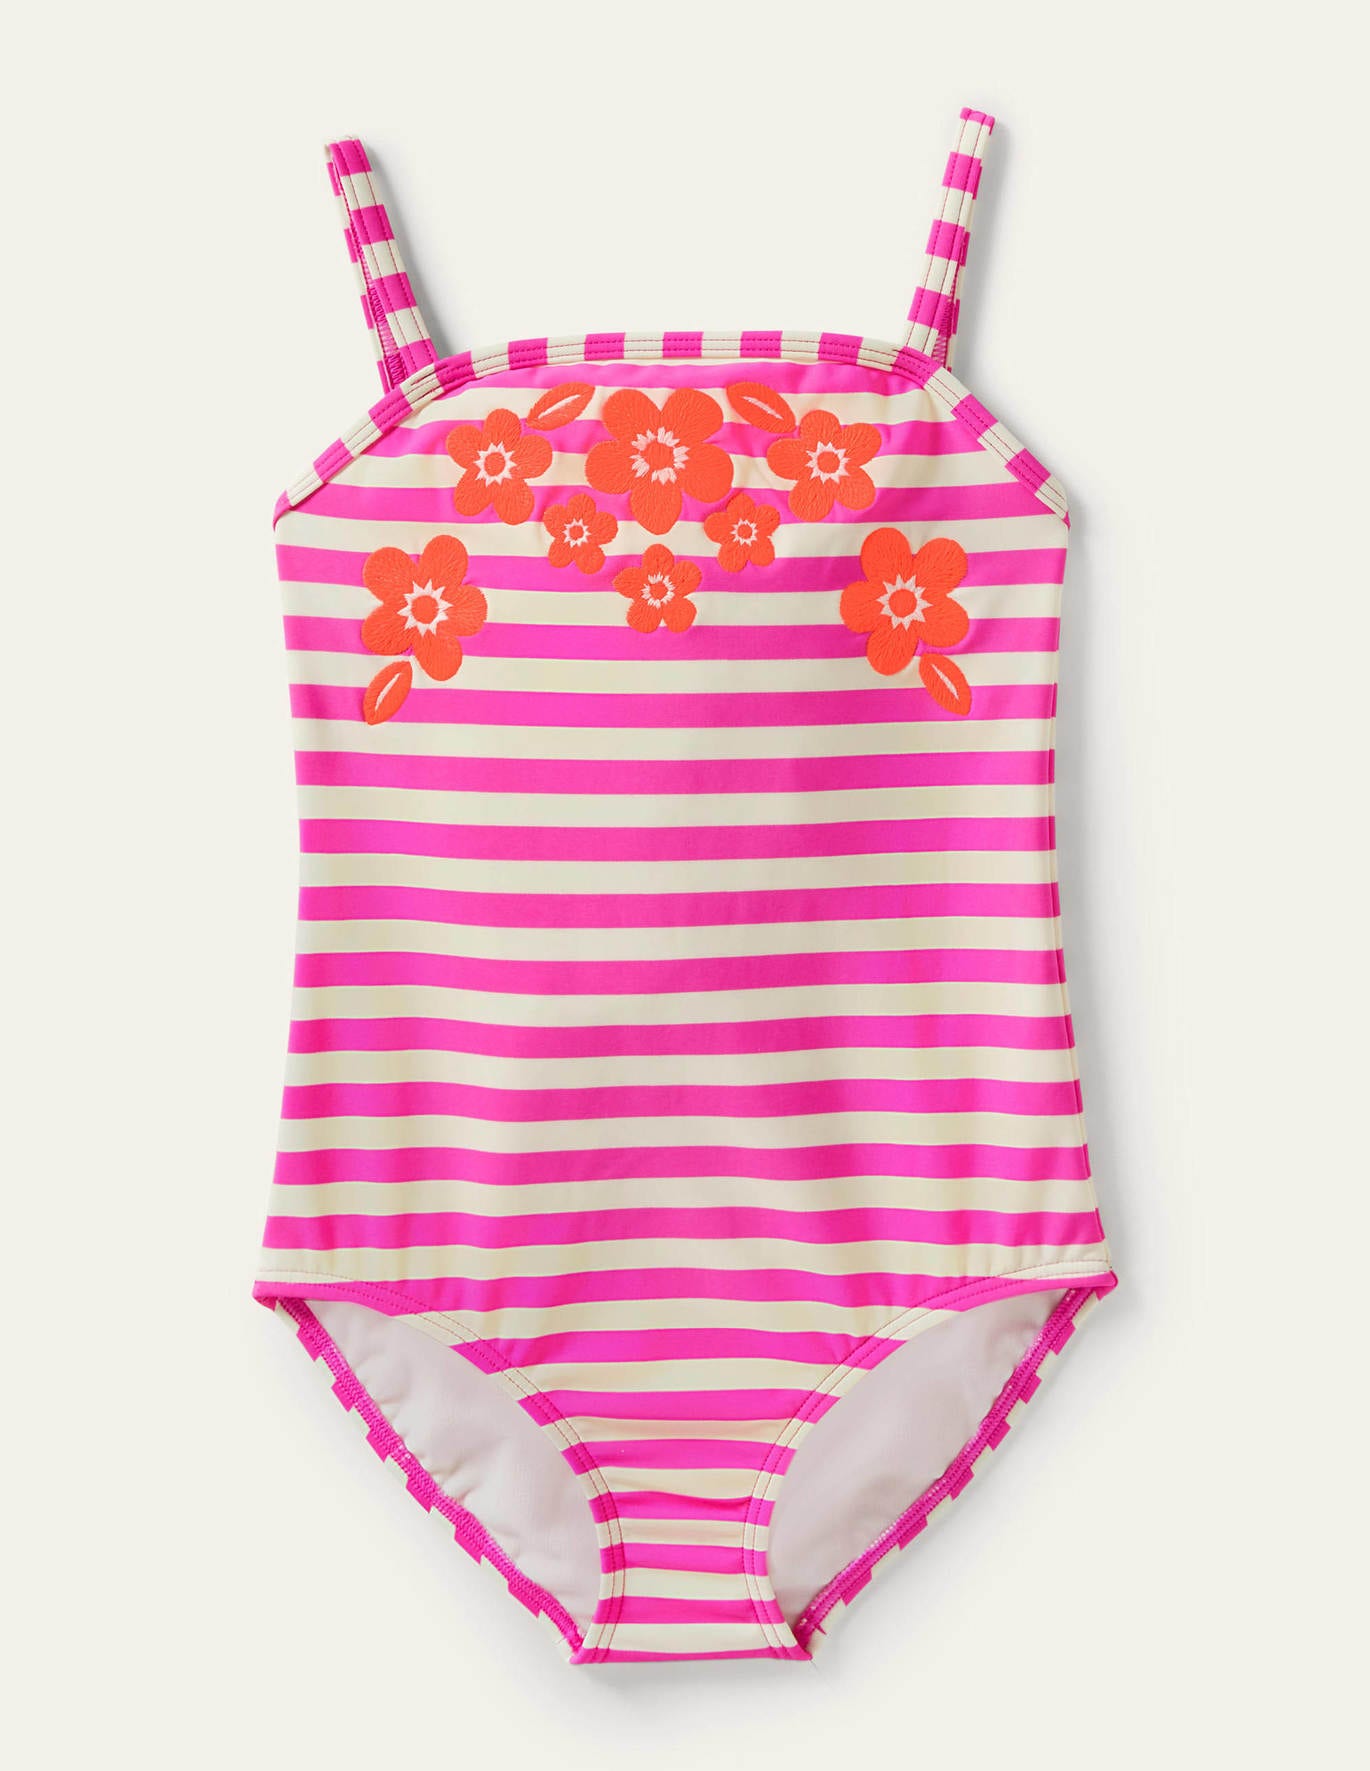 Boden Embroidered Swimsuit - Pop Pansy Pink Stripe